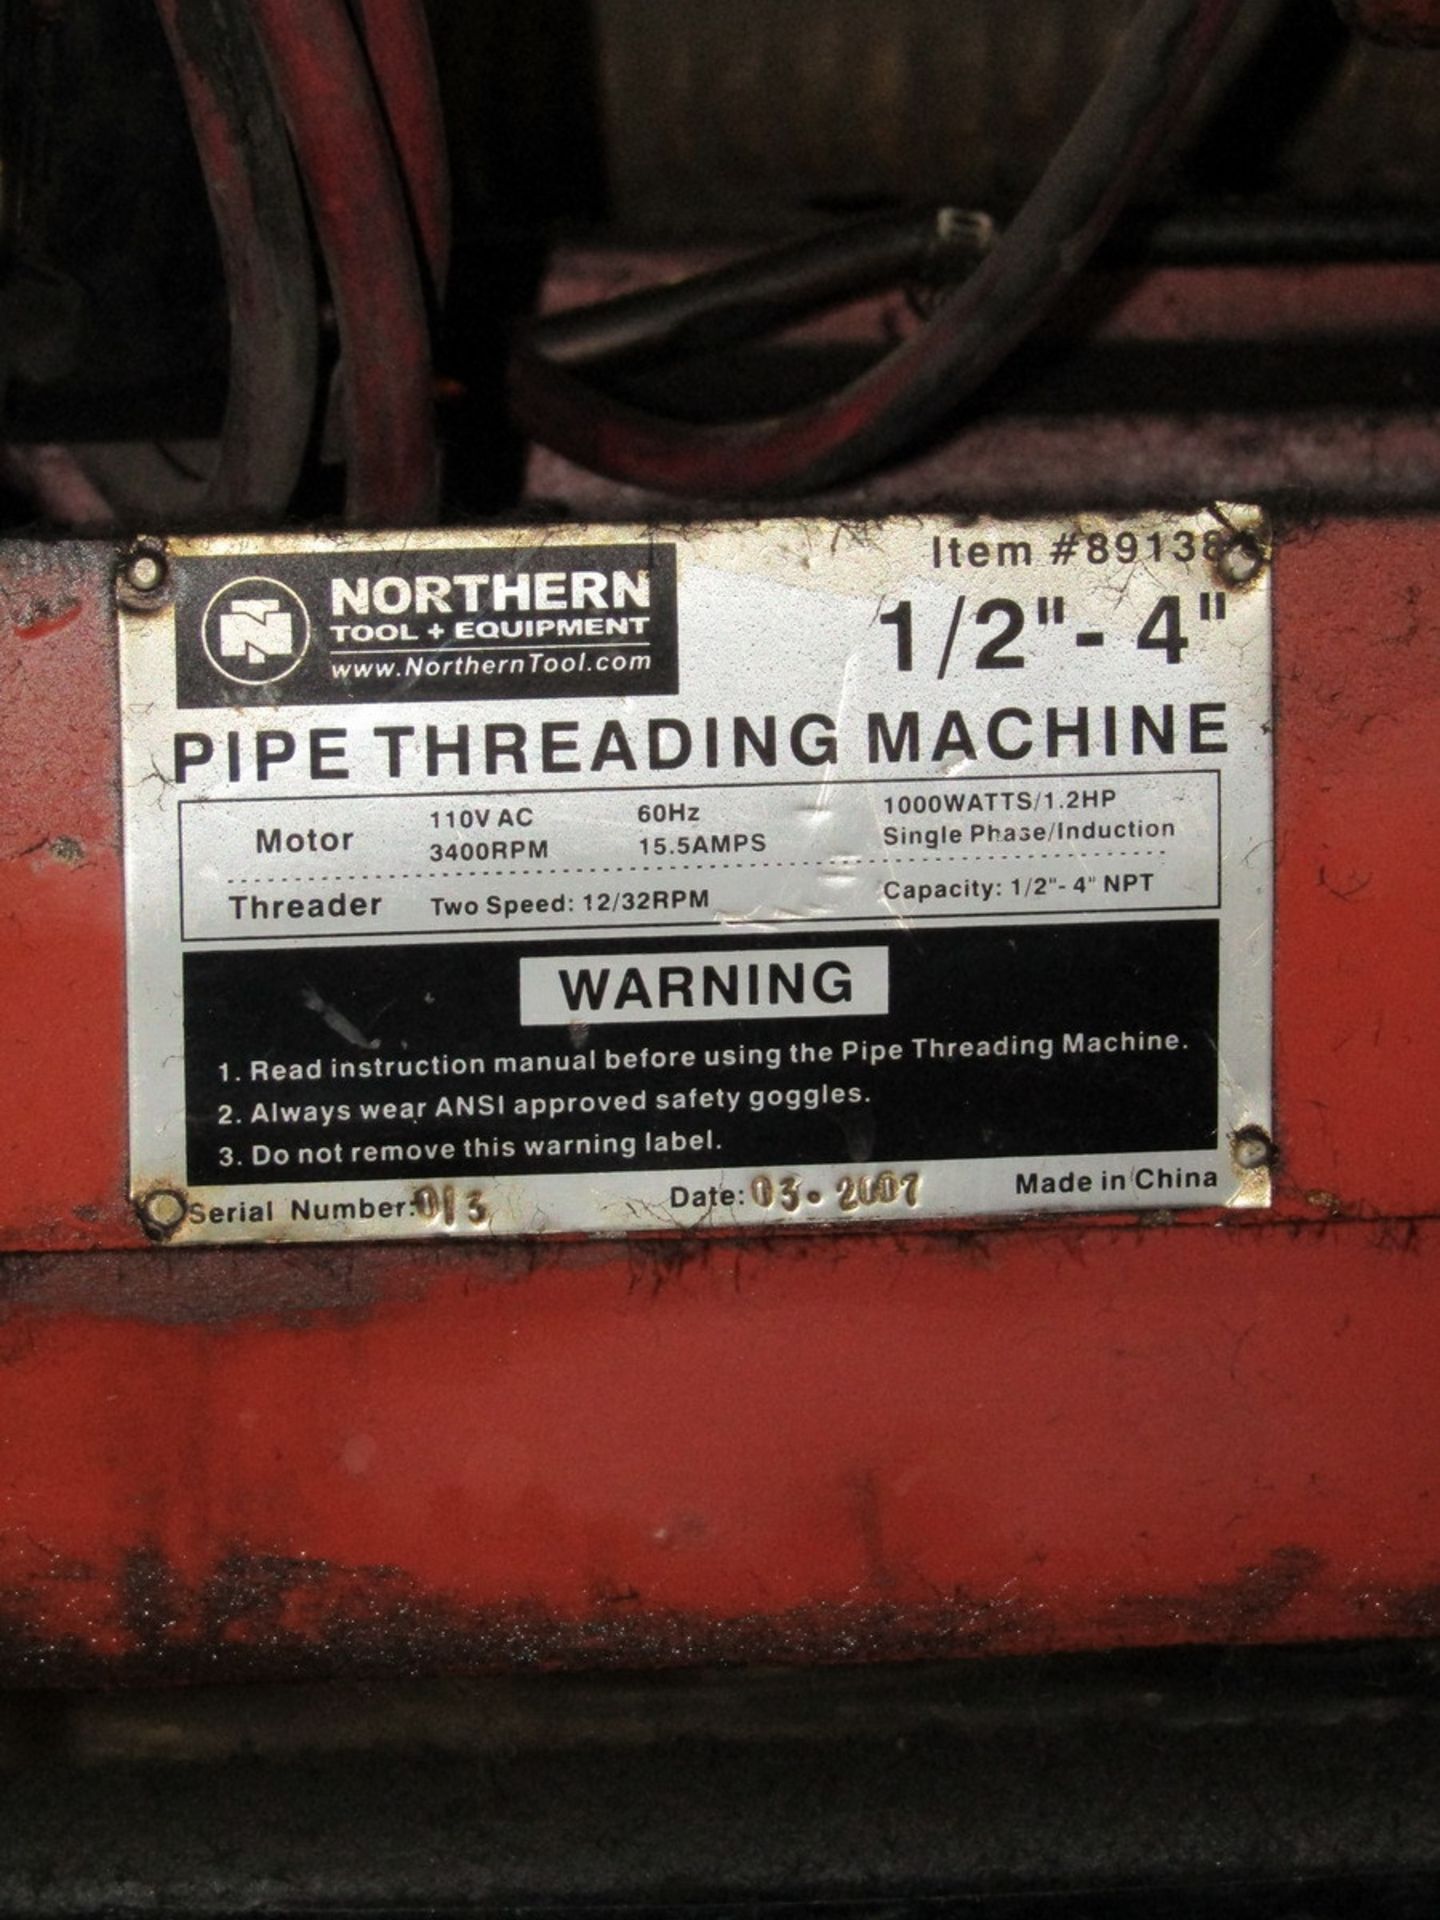 Northern Pipe Threader - Image 8 of 8